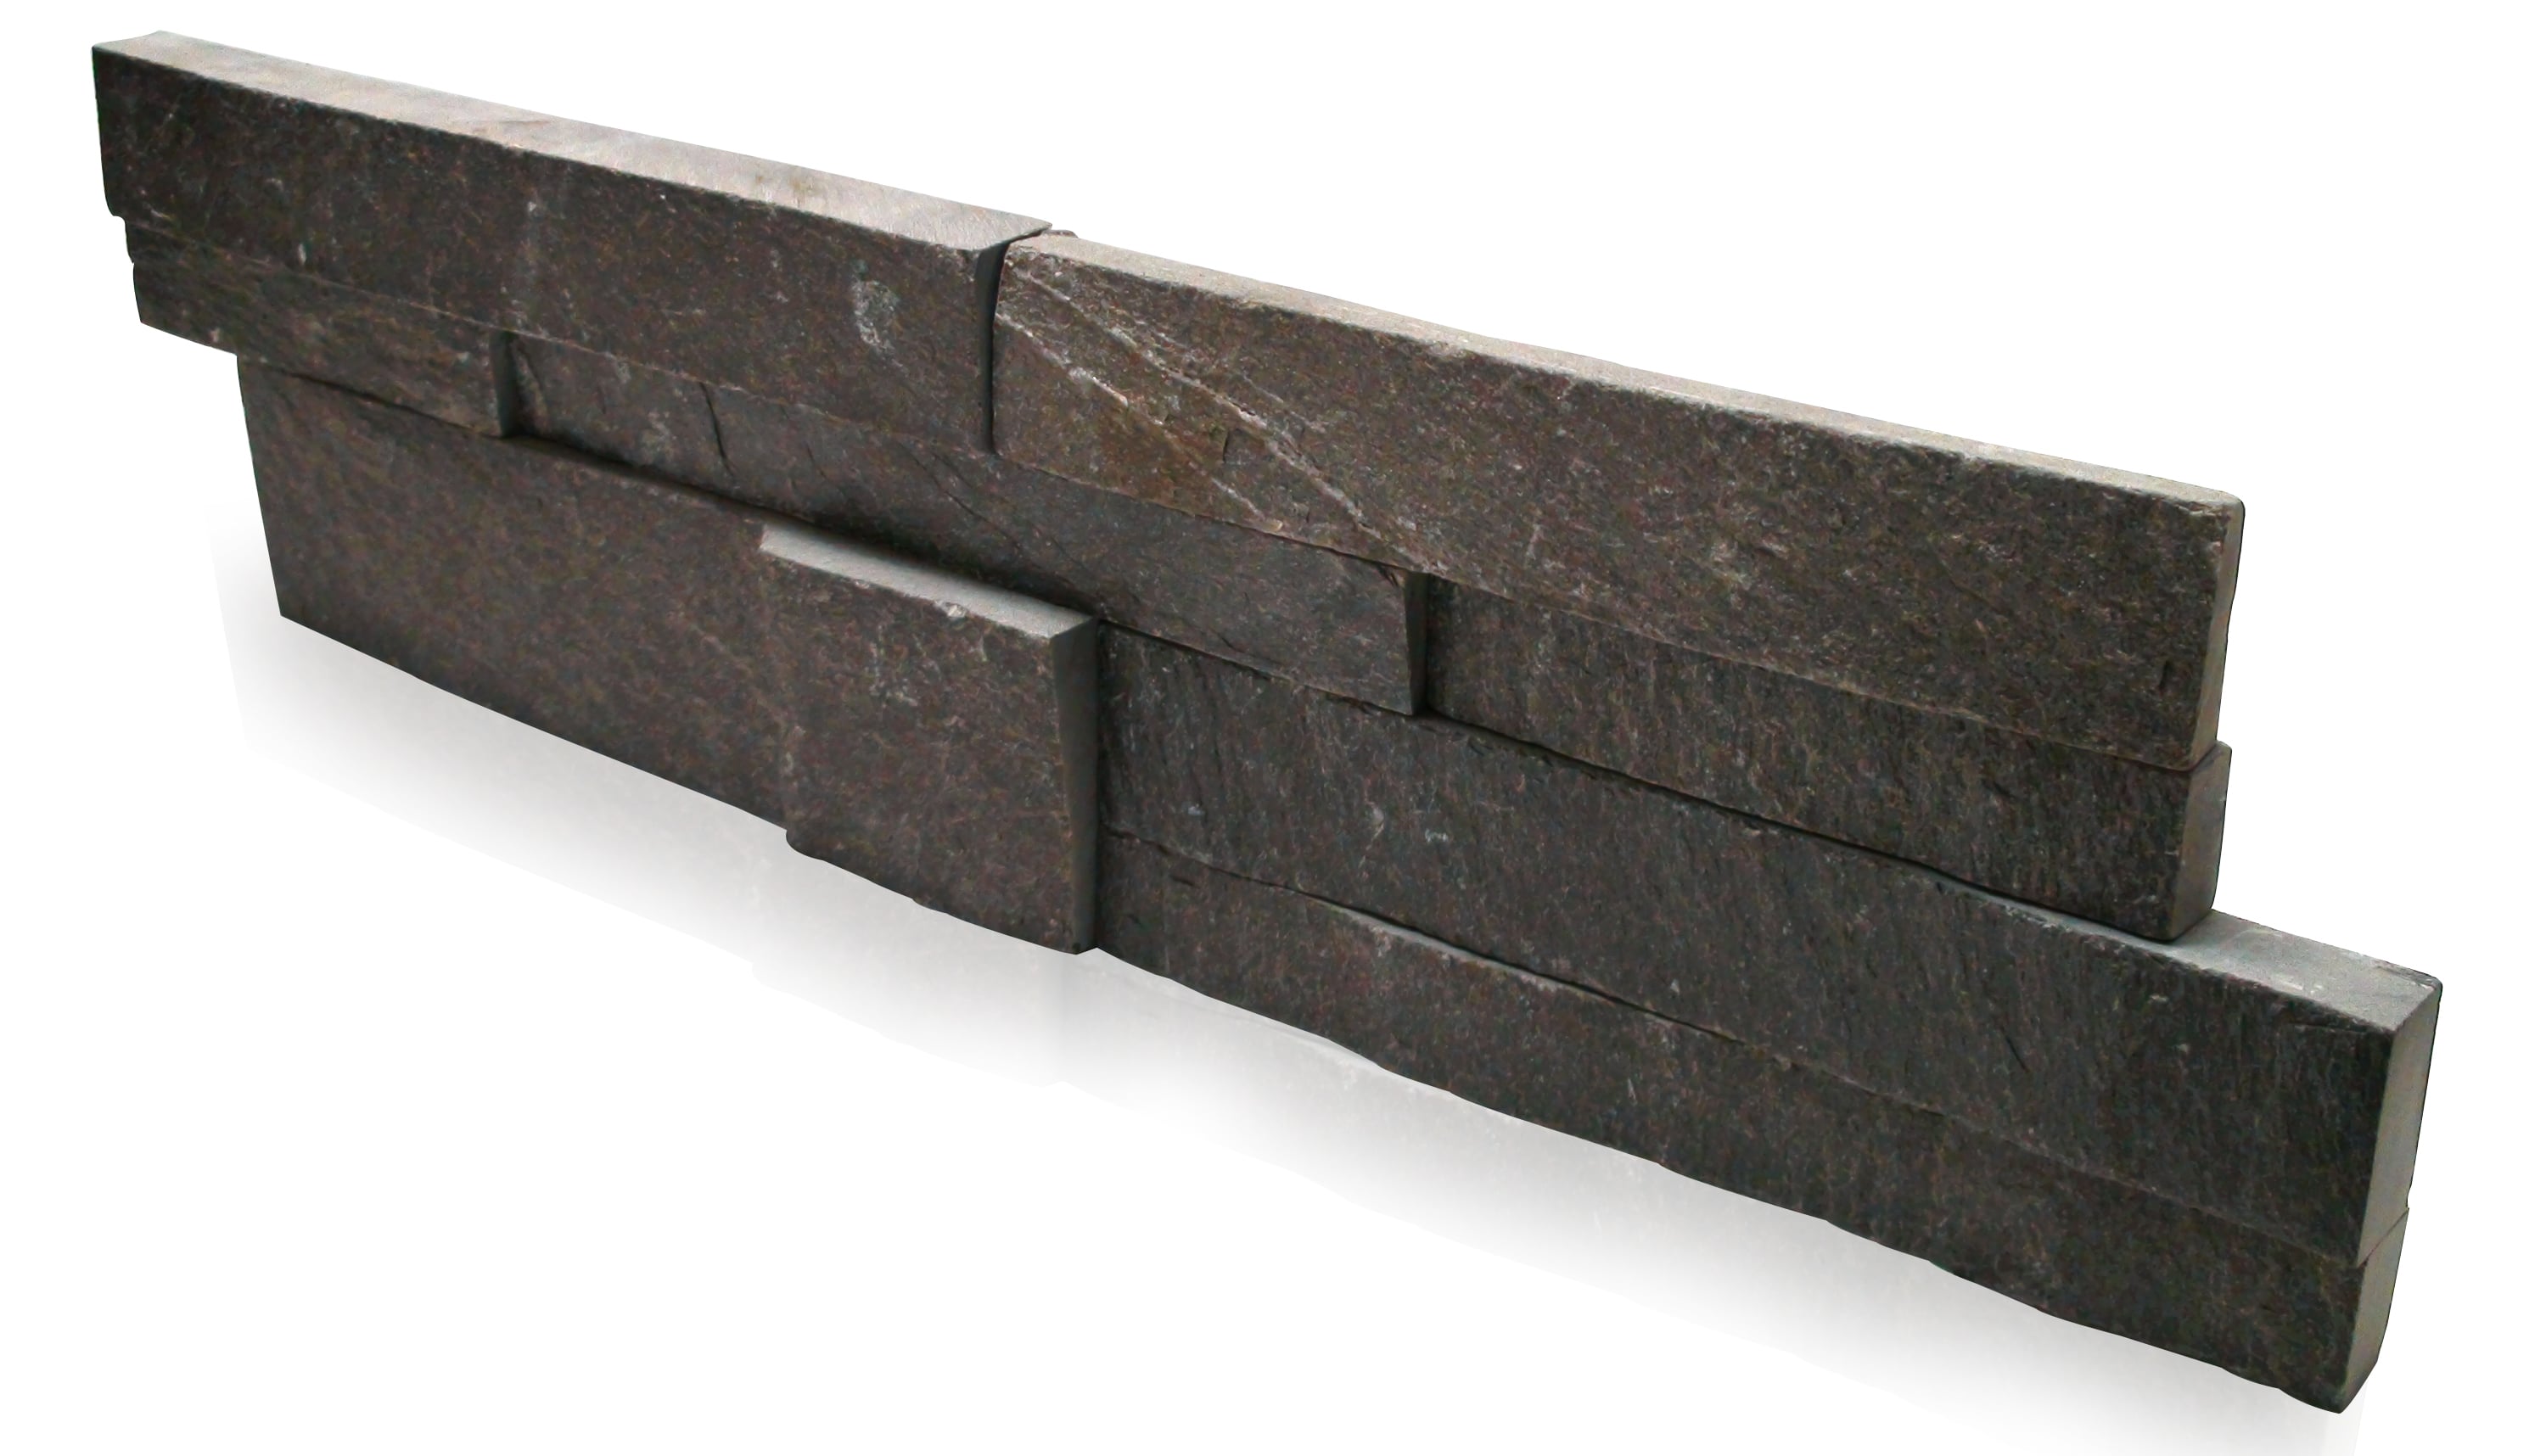 Single field unit of a Norstone Charcoal XLX Rock Panel showing the staggered end profile